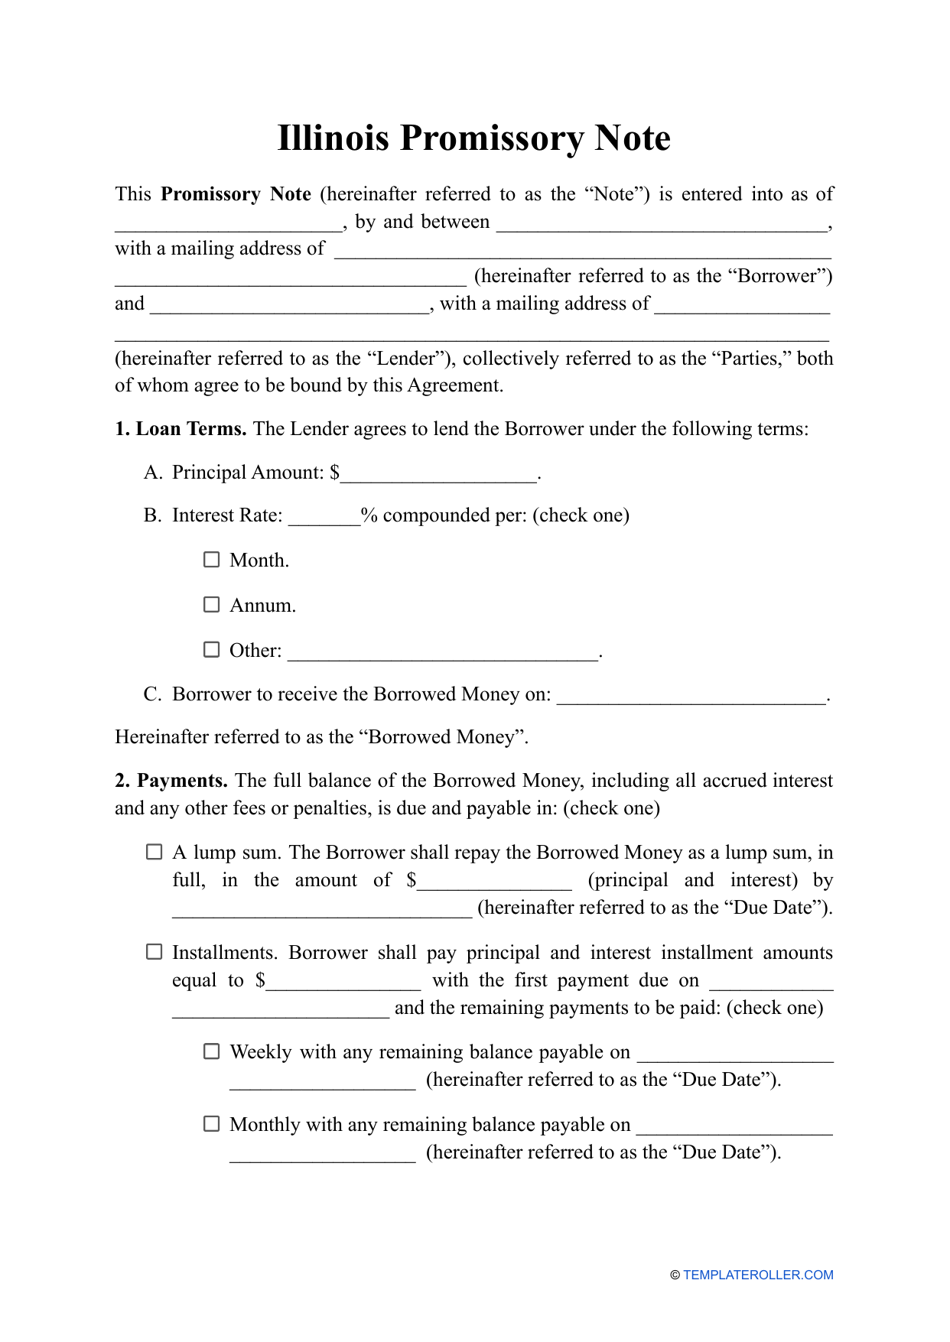 Illinois Promissory Note Template Download Printable PDF Templateroller